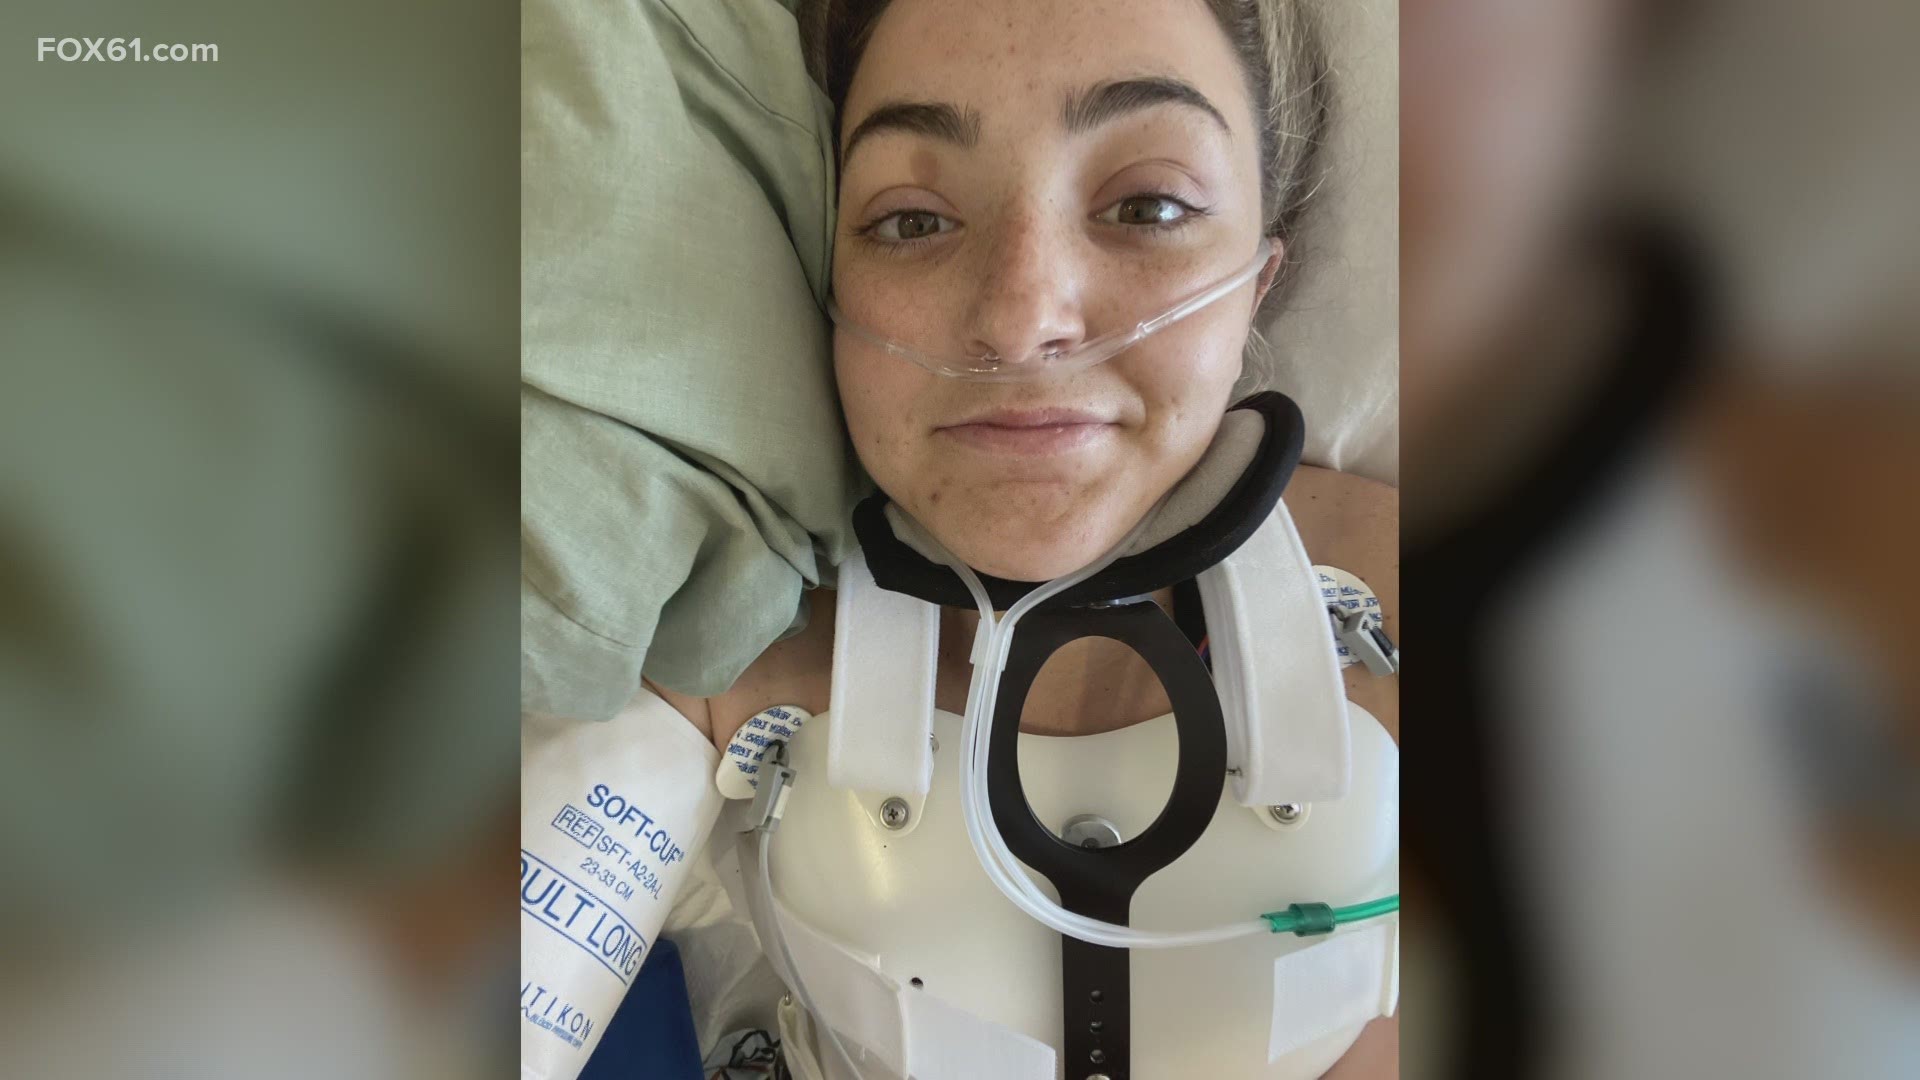 After ending up in the hospital after a skiing accident, Katie LaPierre is working to get her life back.